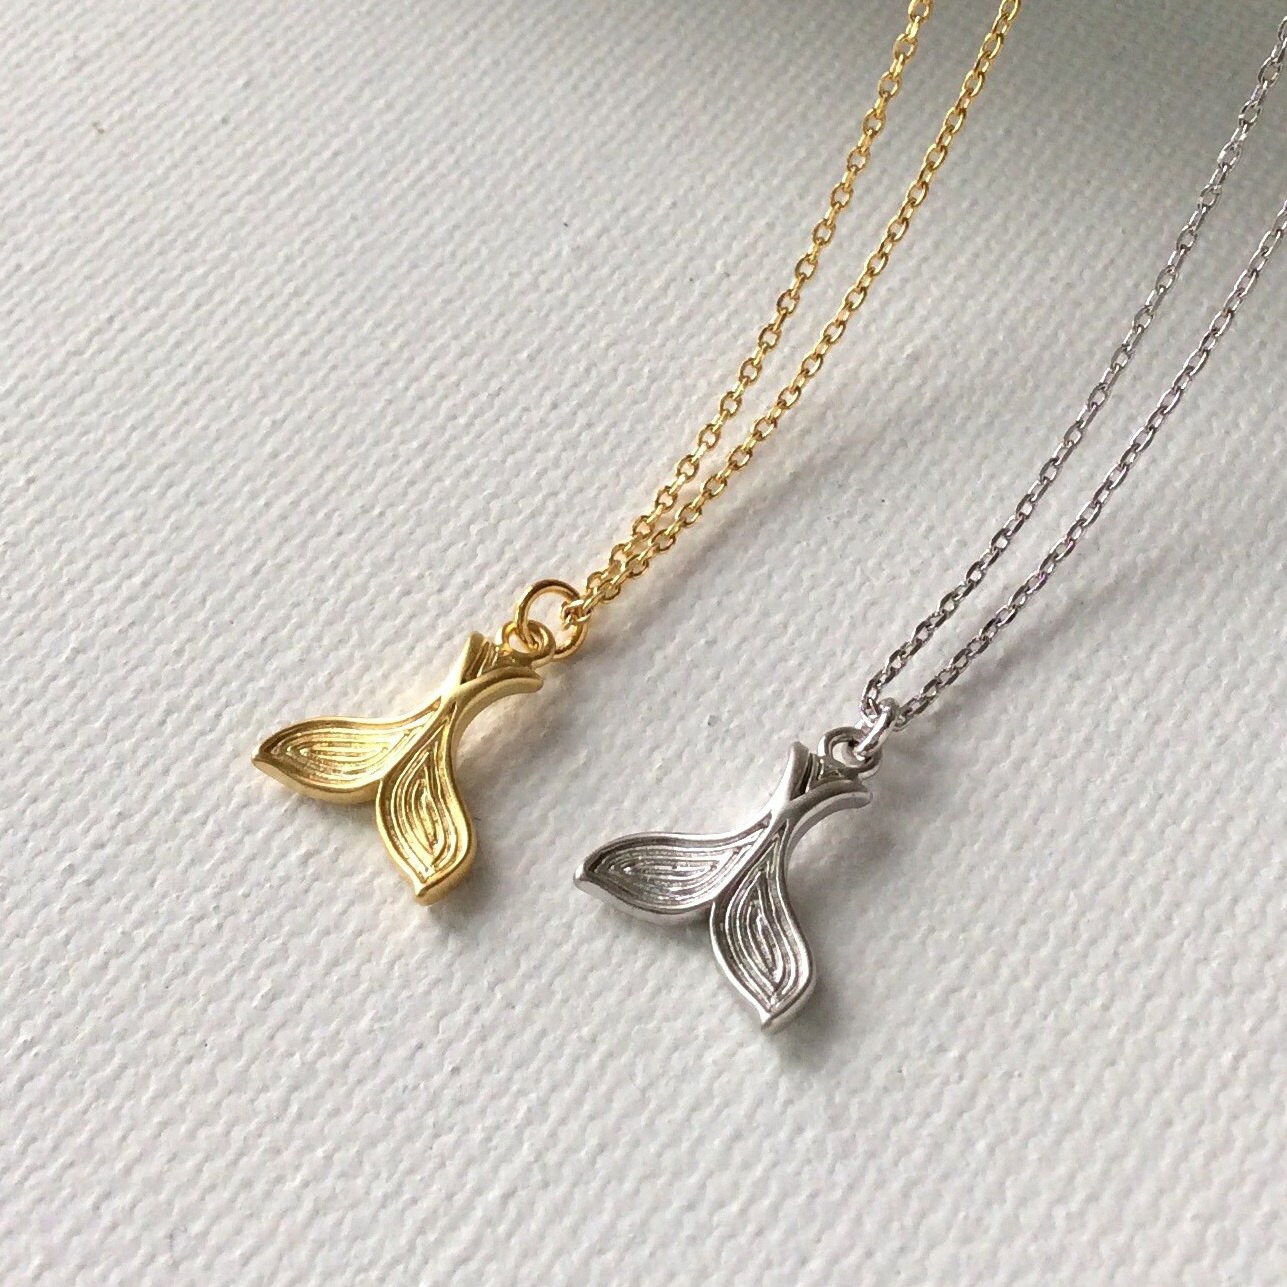 Mermaid Tail Necklace, whale tail necklace, matte gold mermaid tail necklace, matte silver mermaid tail charm jewelry, Sea life jewelry